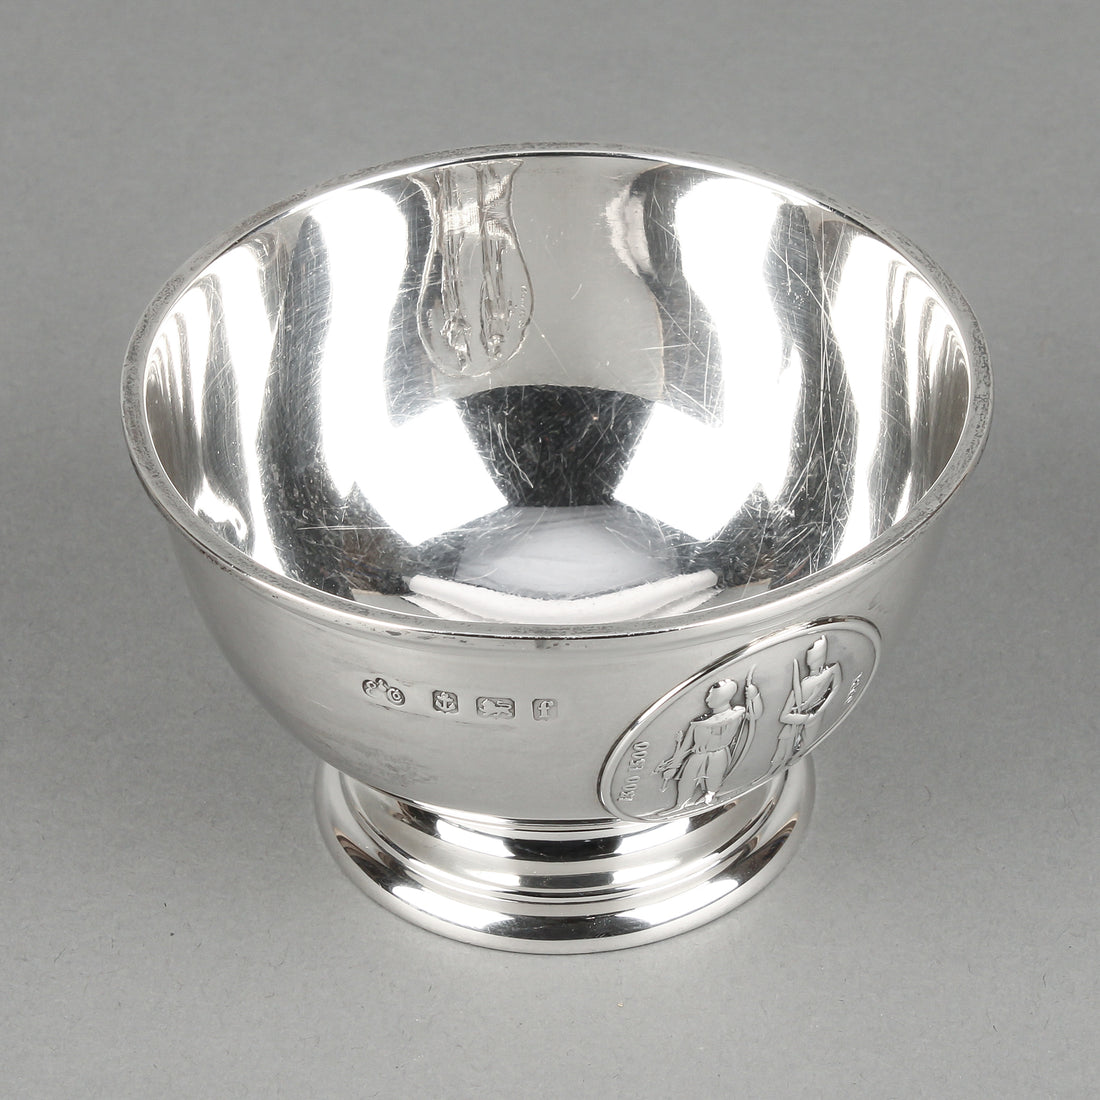 ELKINGTON & CO. Sterling Silver Footed Bowl with Sit Perpetuum Medallion